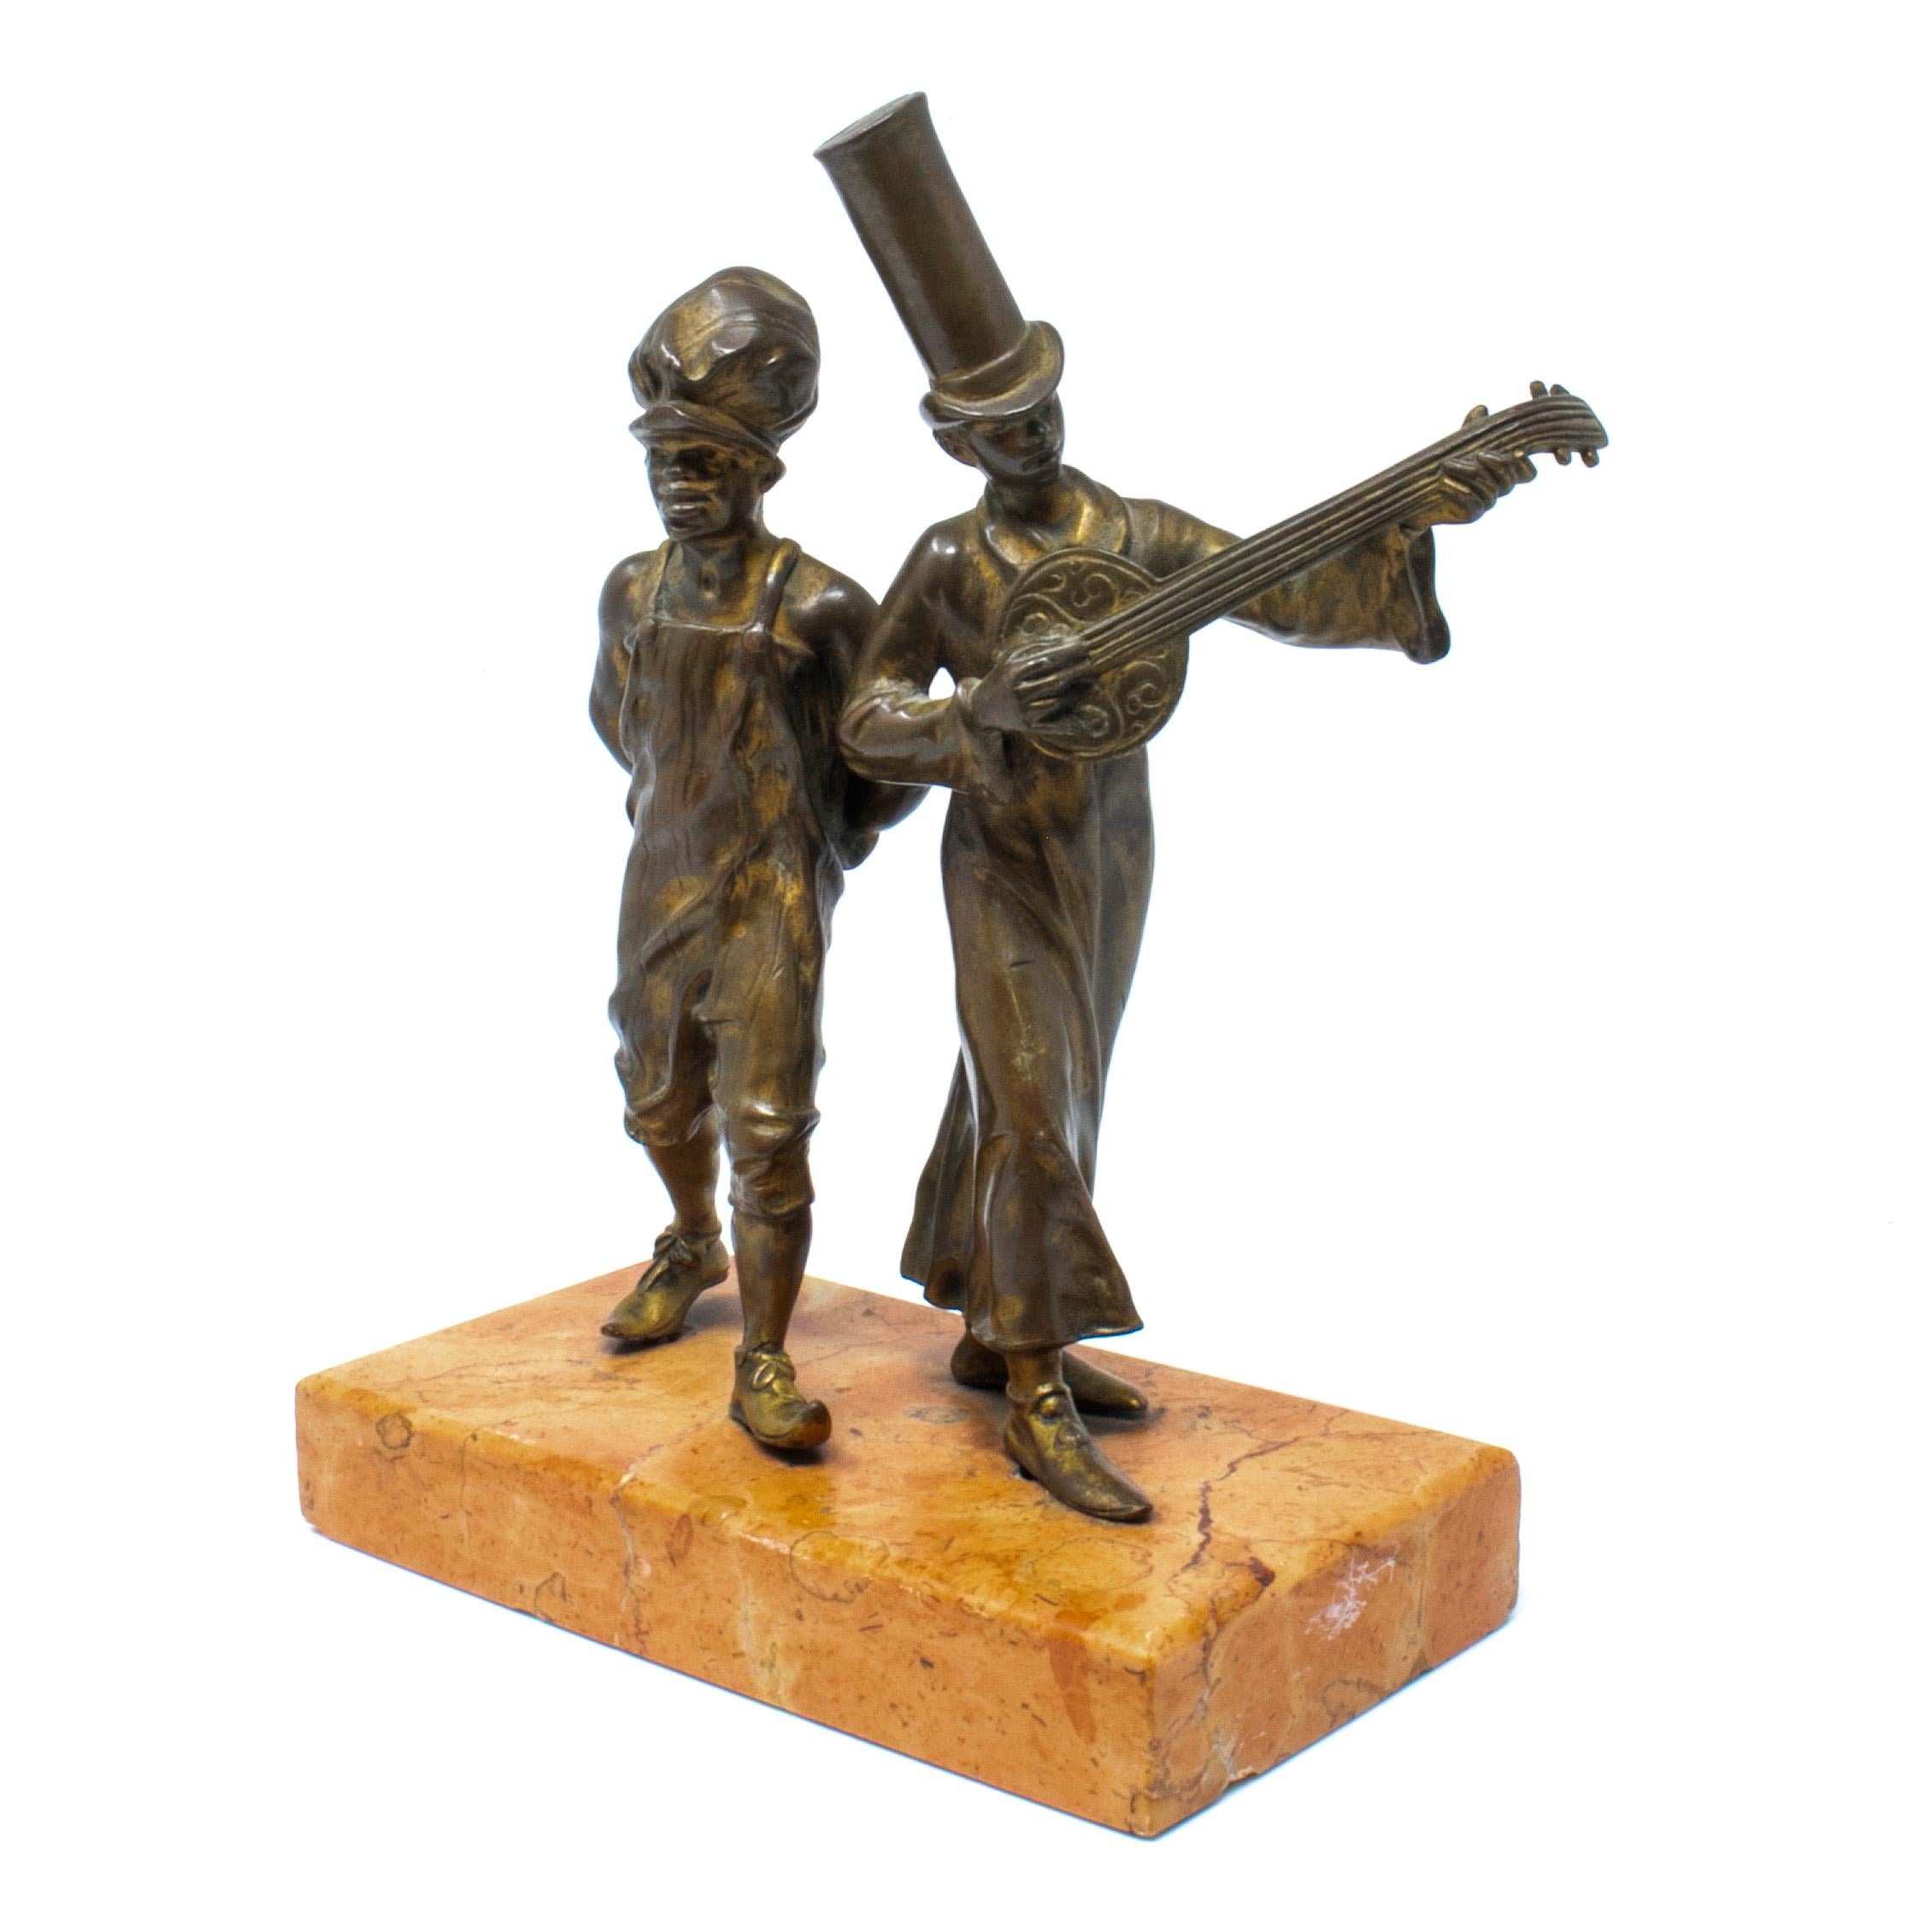 19th century bronze figure of two street boys, one with tall hat and a banjo, on a marble base.